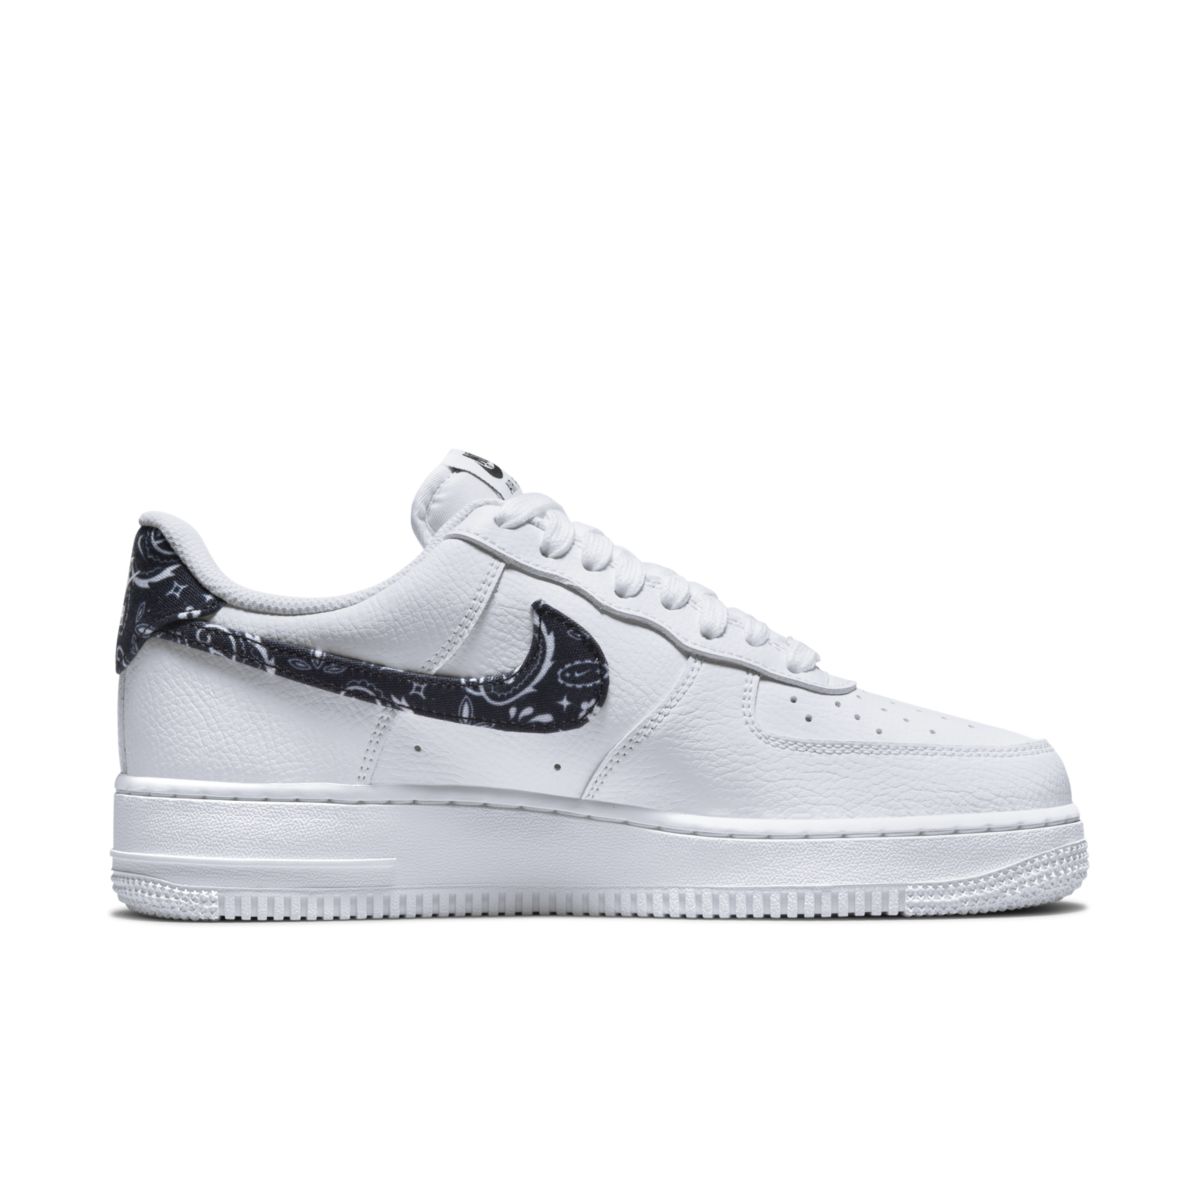 Nike Air Force 1 low black paisley DH4406-101 3